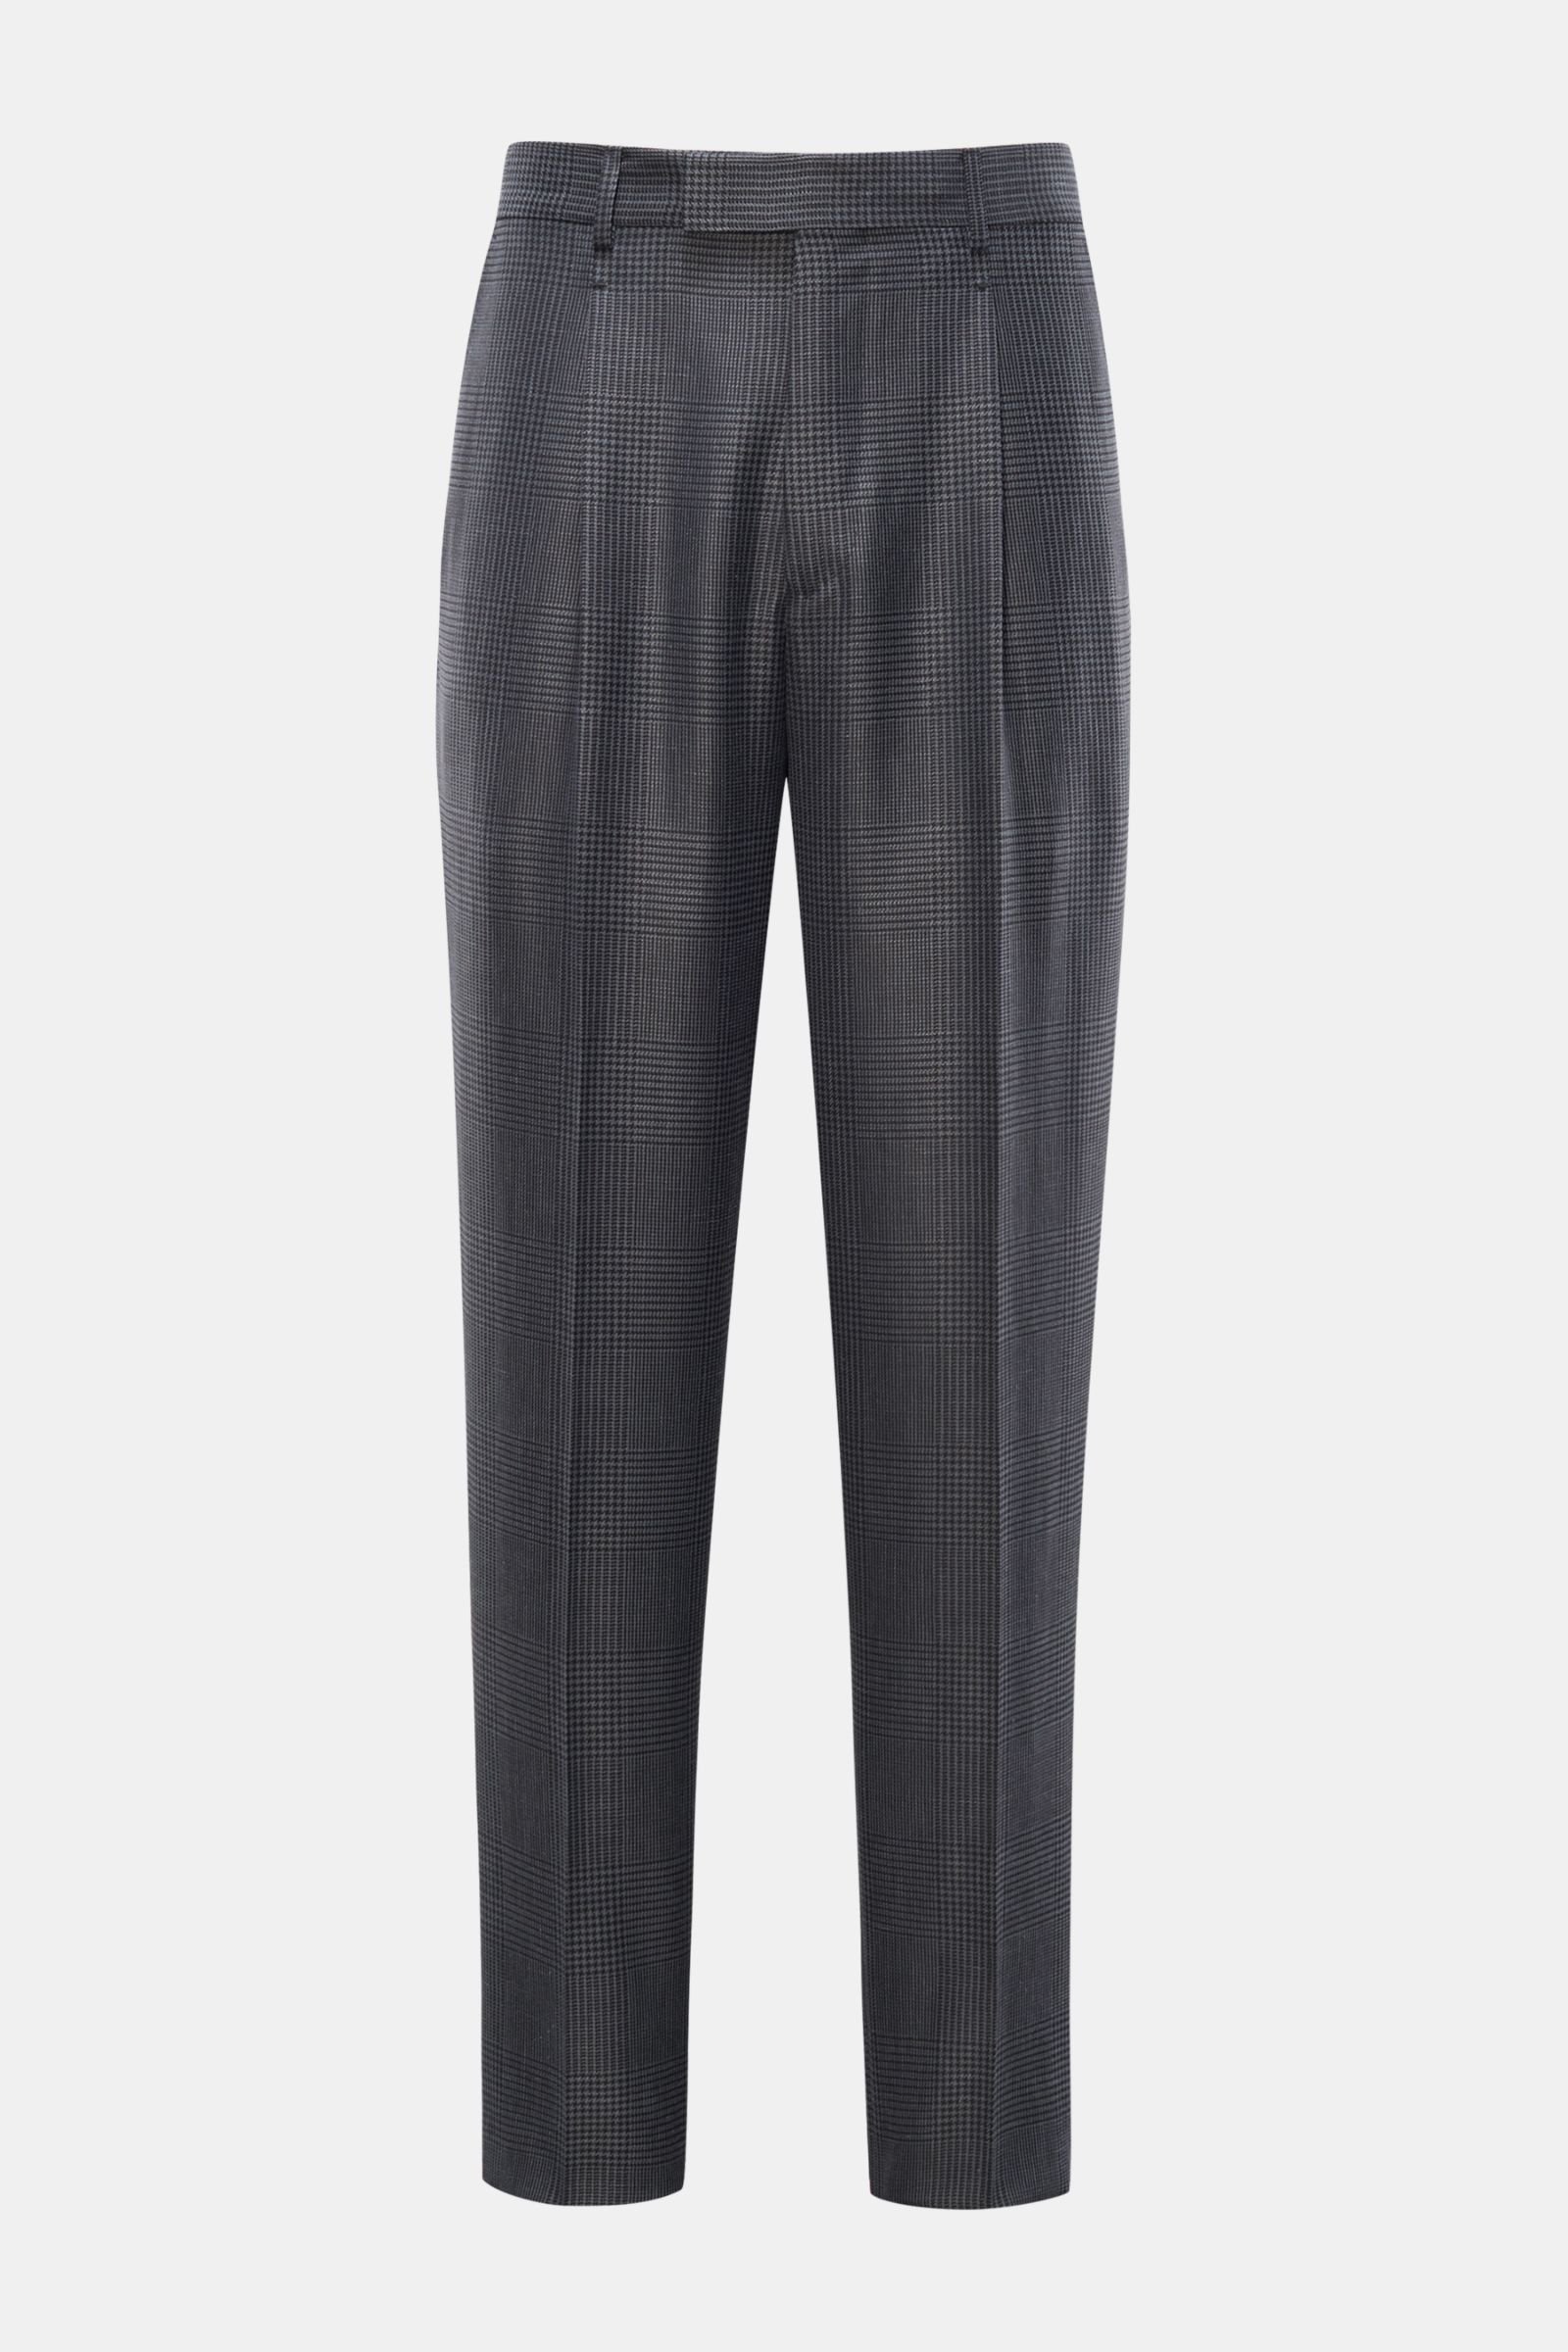 Trousers dark grey/anthracite checked